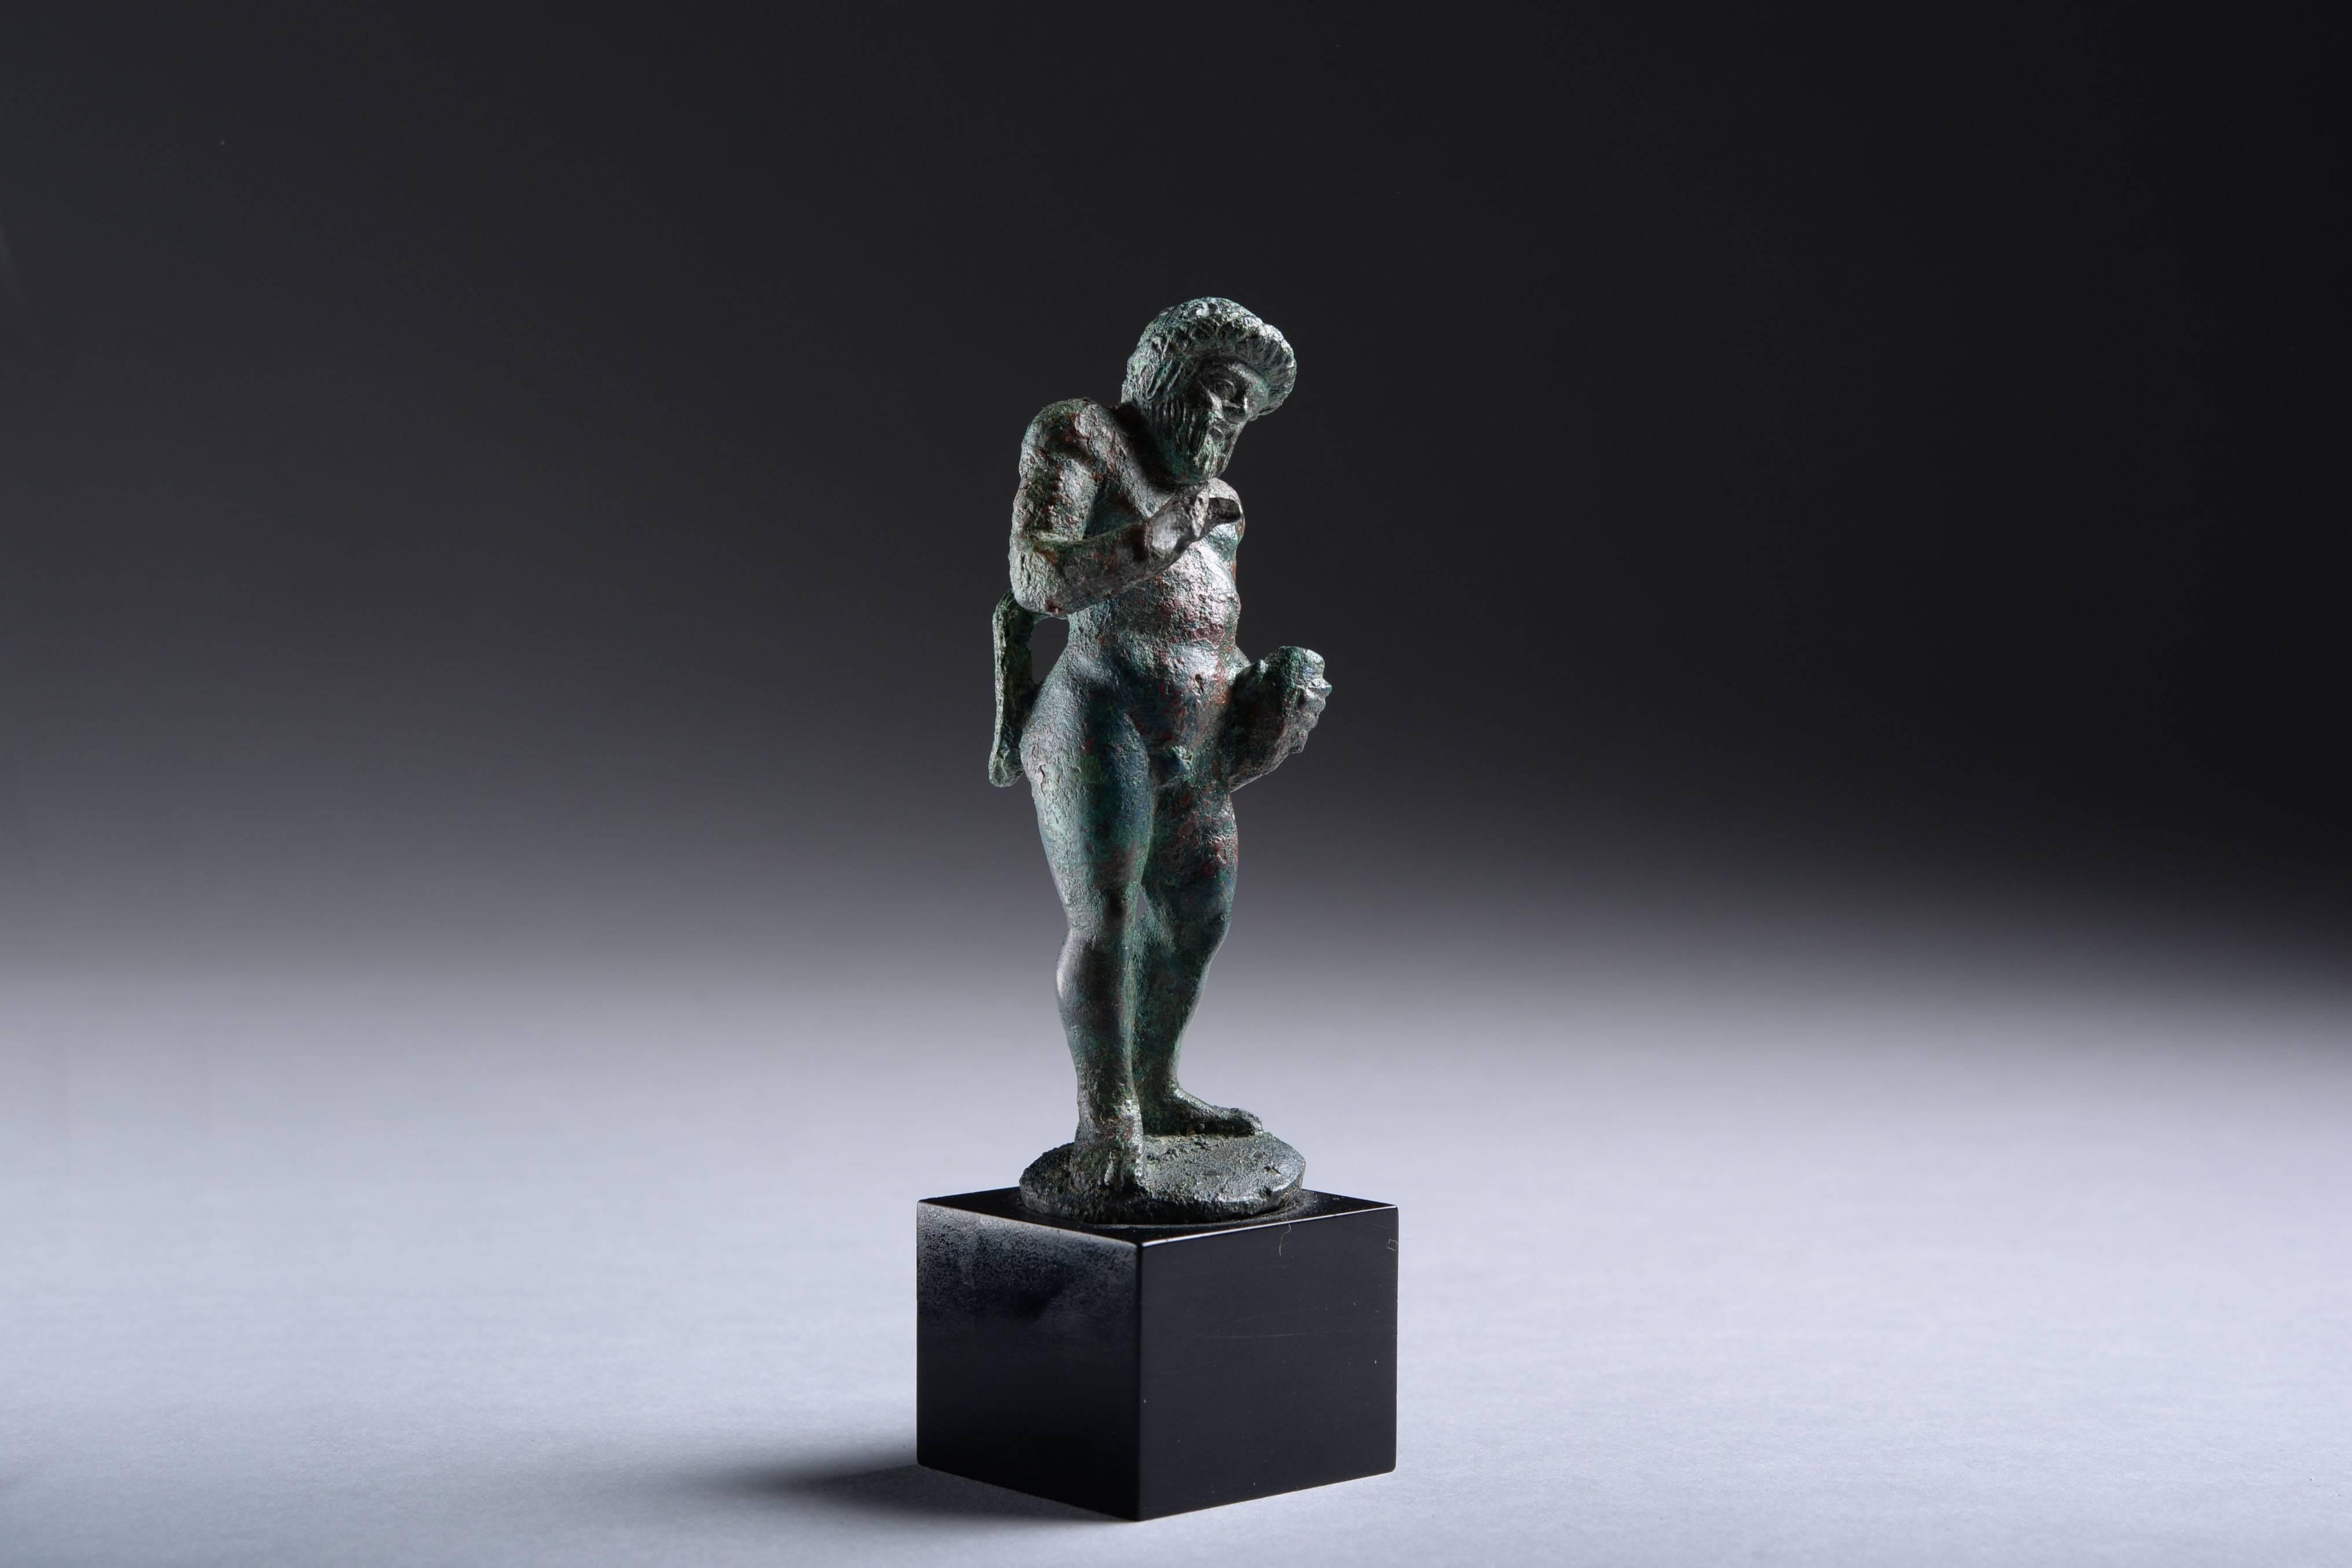 An Etruscan bronze statuette of a drunk satyr, dating to the 5th century BC.

The figure is shown with an unsteady gait, inebriated after drinking the contents of his Horn cup! Well modelled with musculature, bushy tail, beard and long moustache,